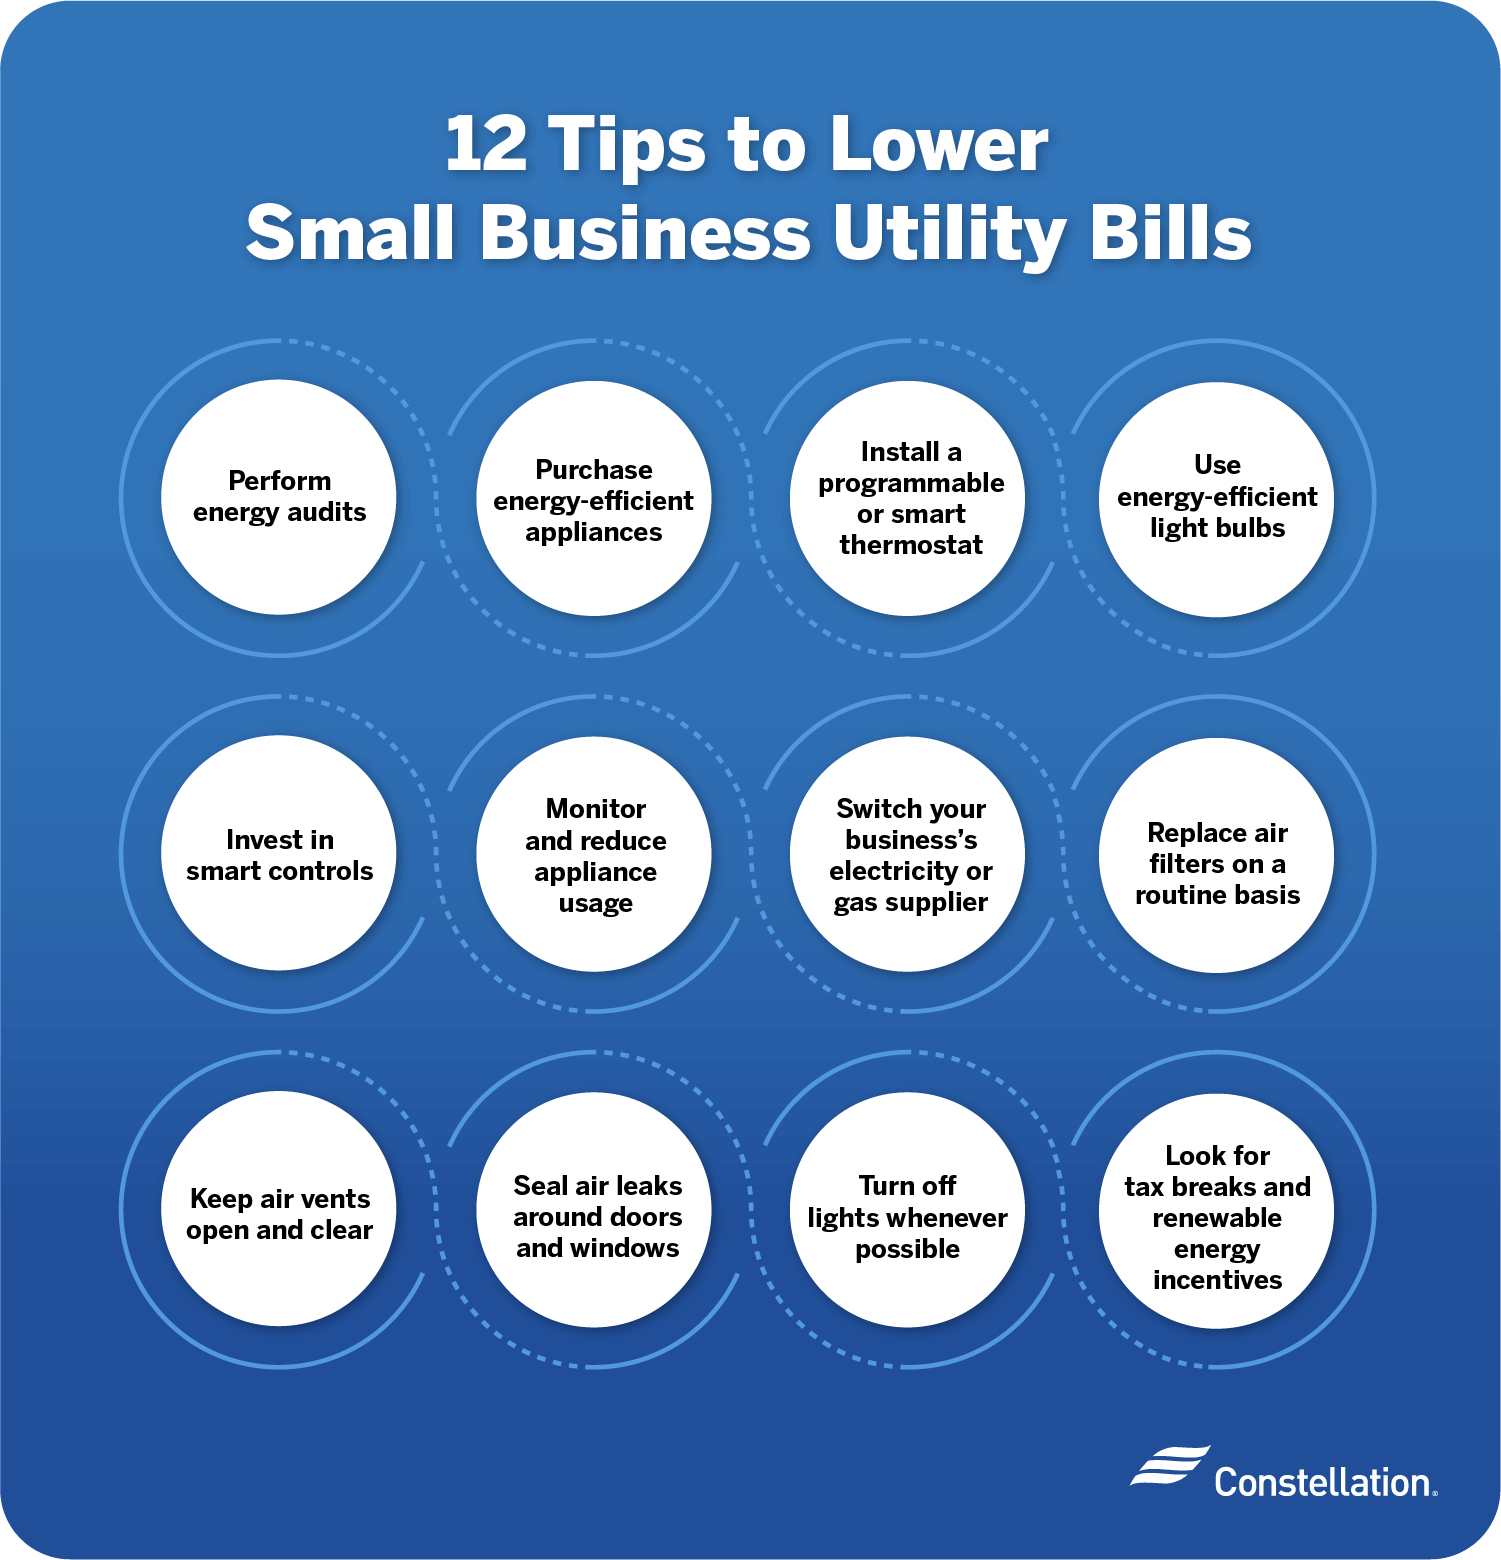 Small business utility tips.